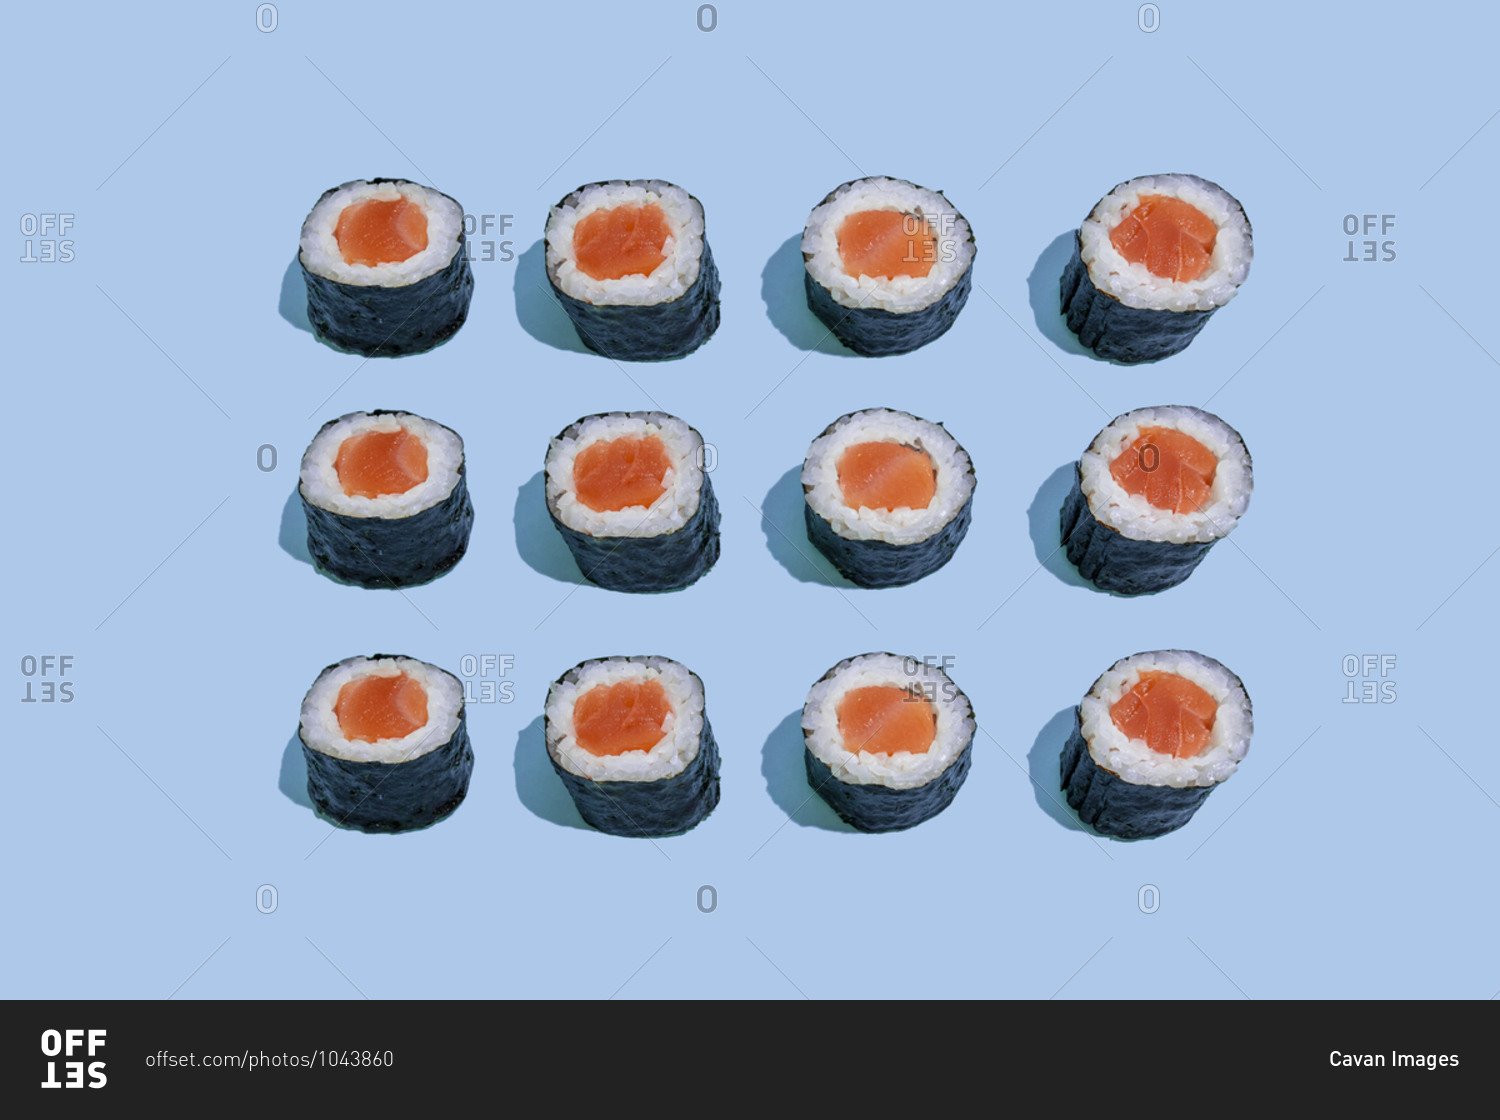 Salmond sushi makis pattern on blue background with shadows